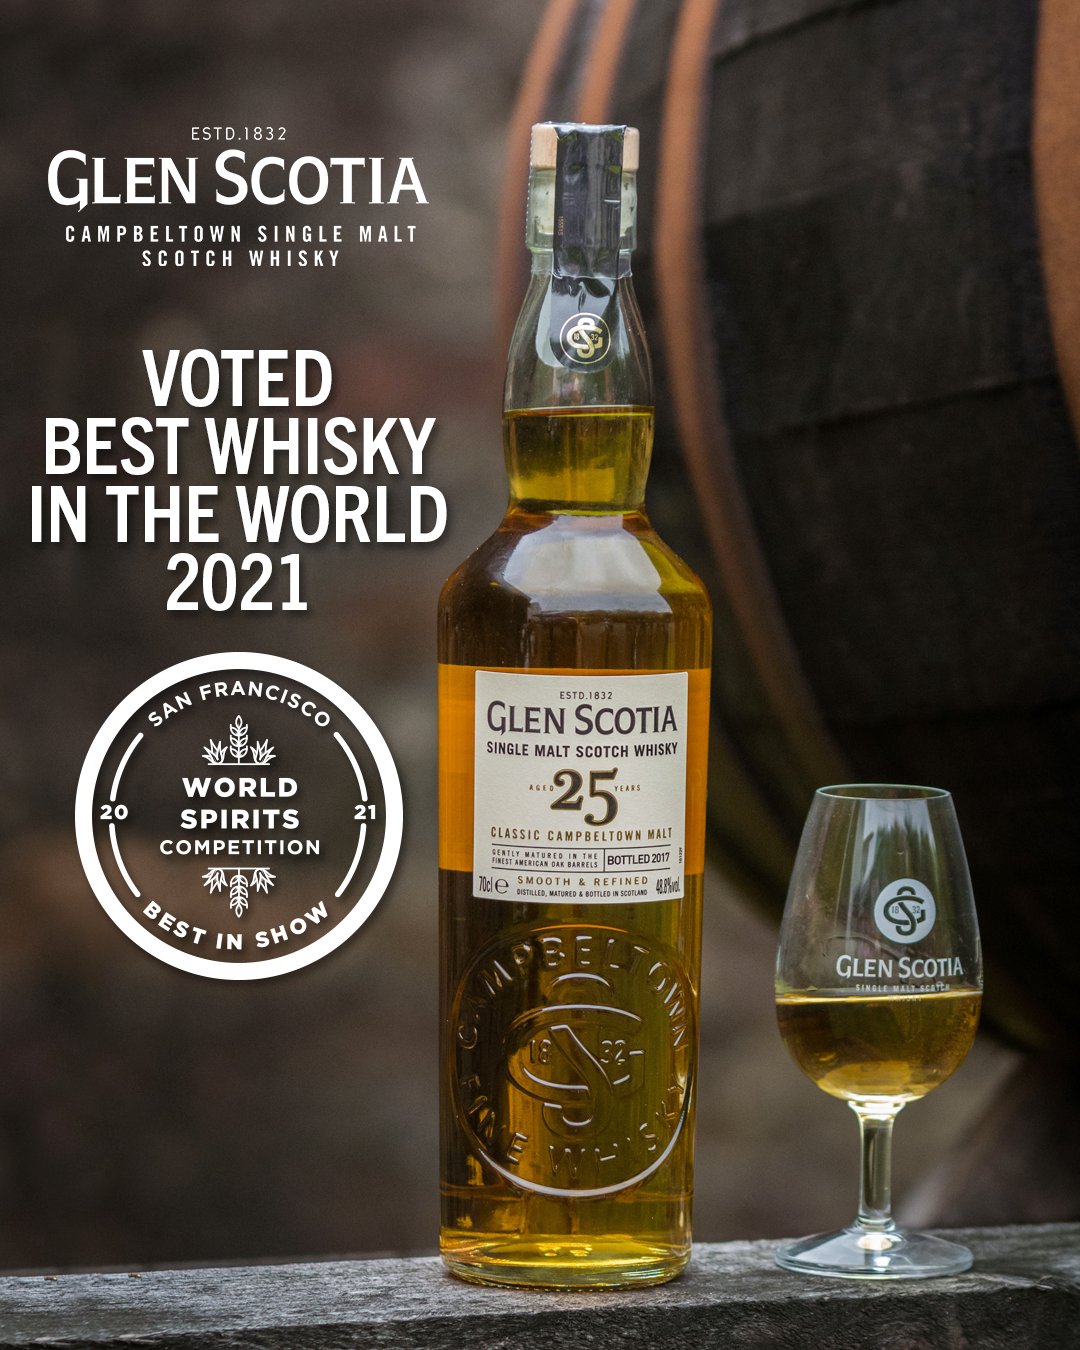 Glen Scotia 25 Year Old Named Best Whisky In The World - Loch Lomond Group